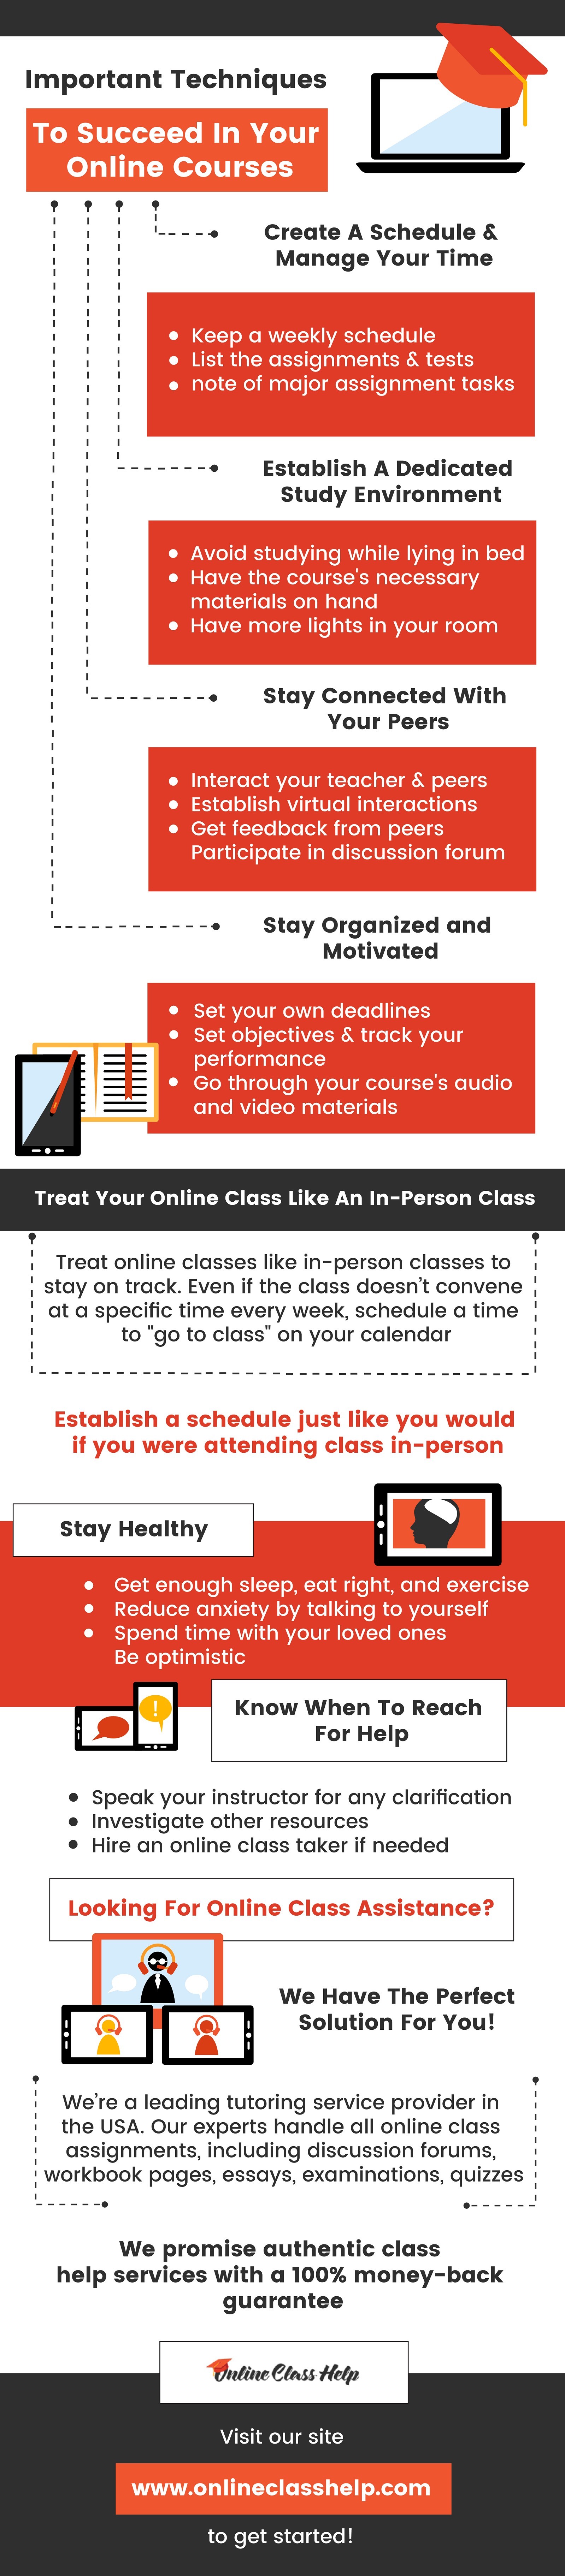 Tips to Succeed in Your Online Class